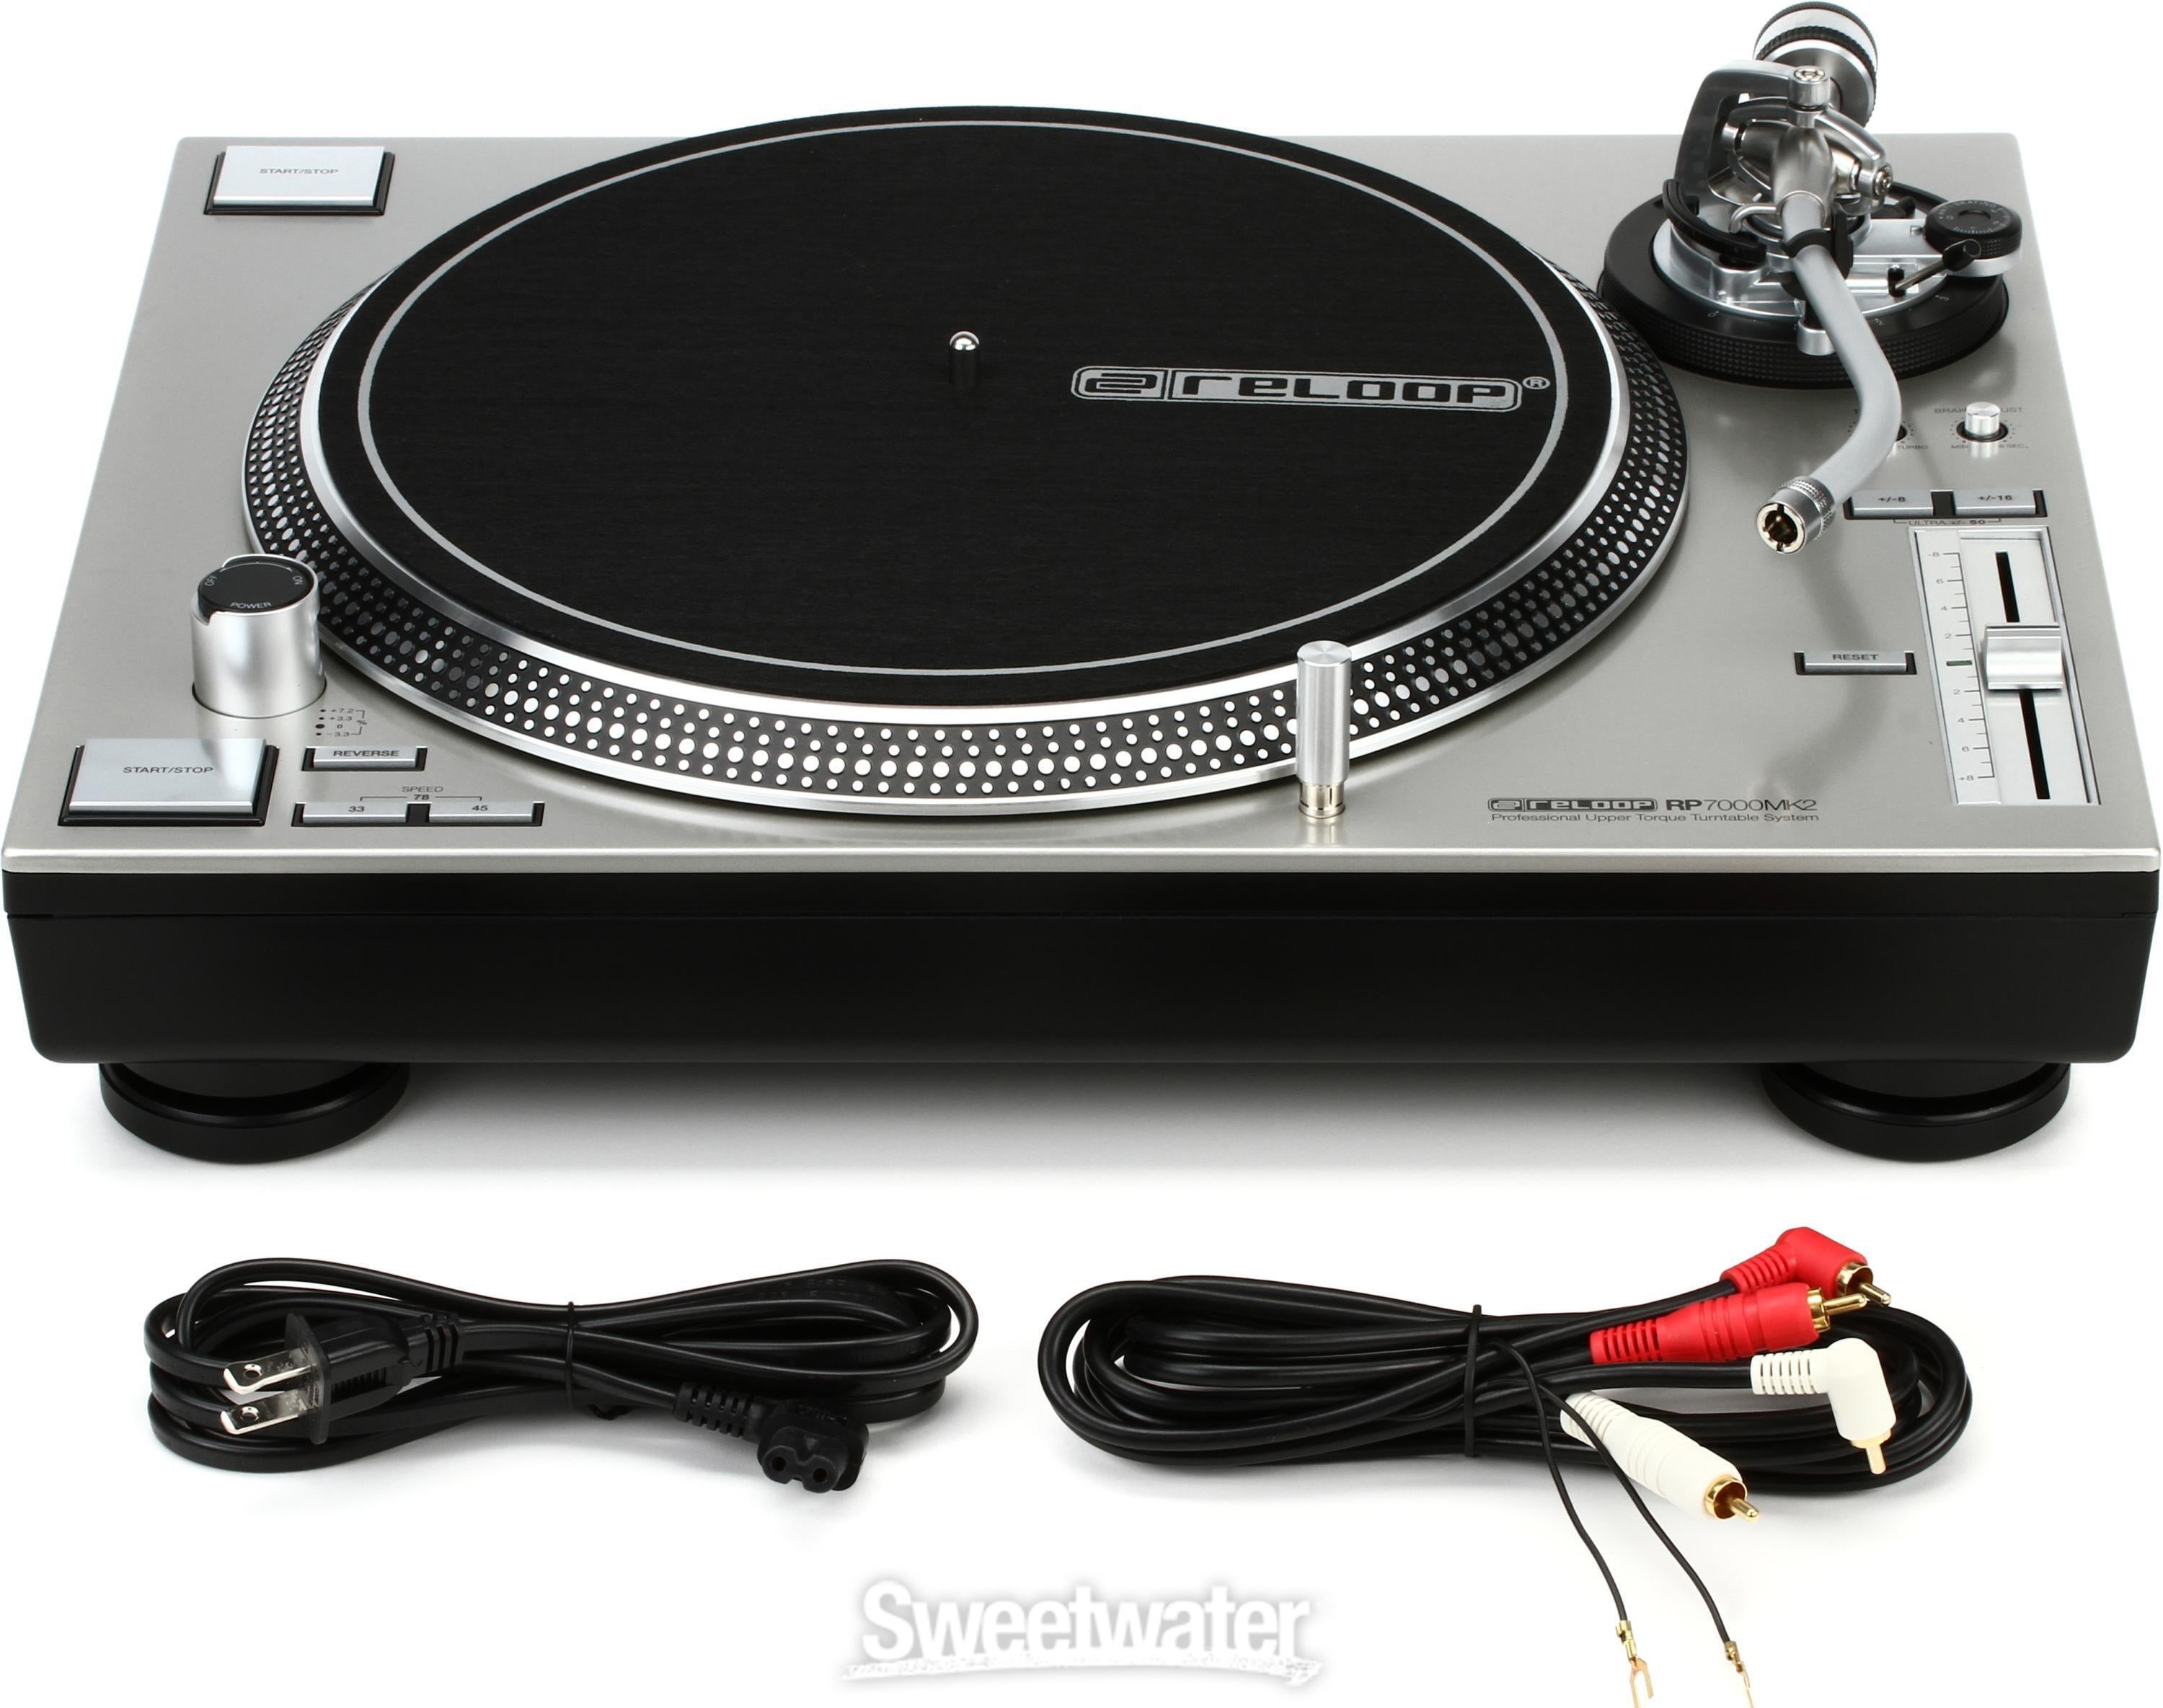 Reloop RP-7000 MK2 Direct Drive Turntable - Silver | Sweetwater